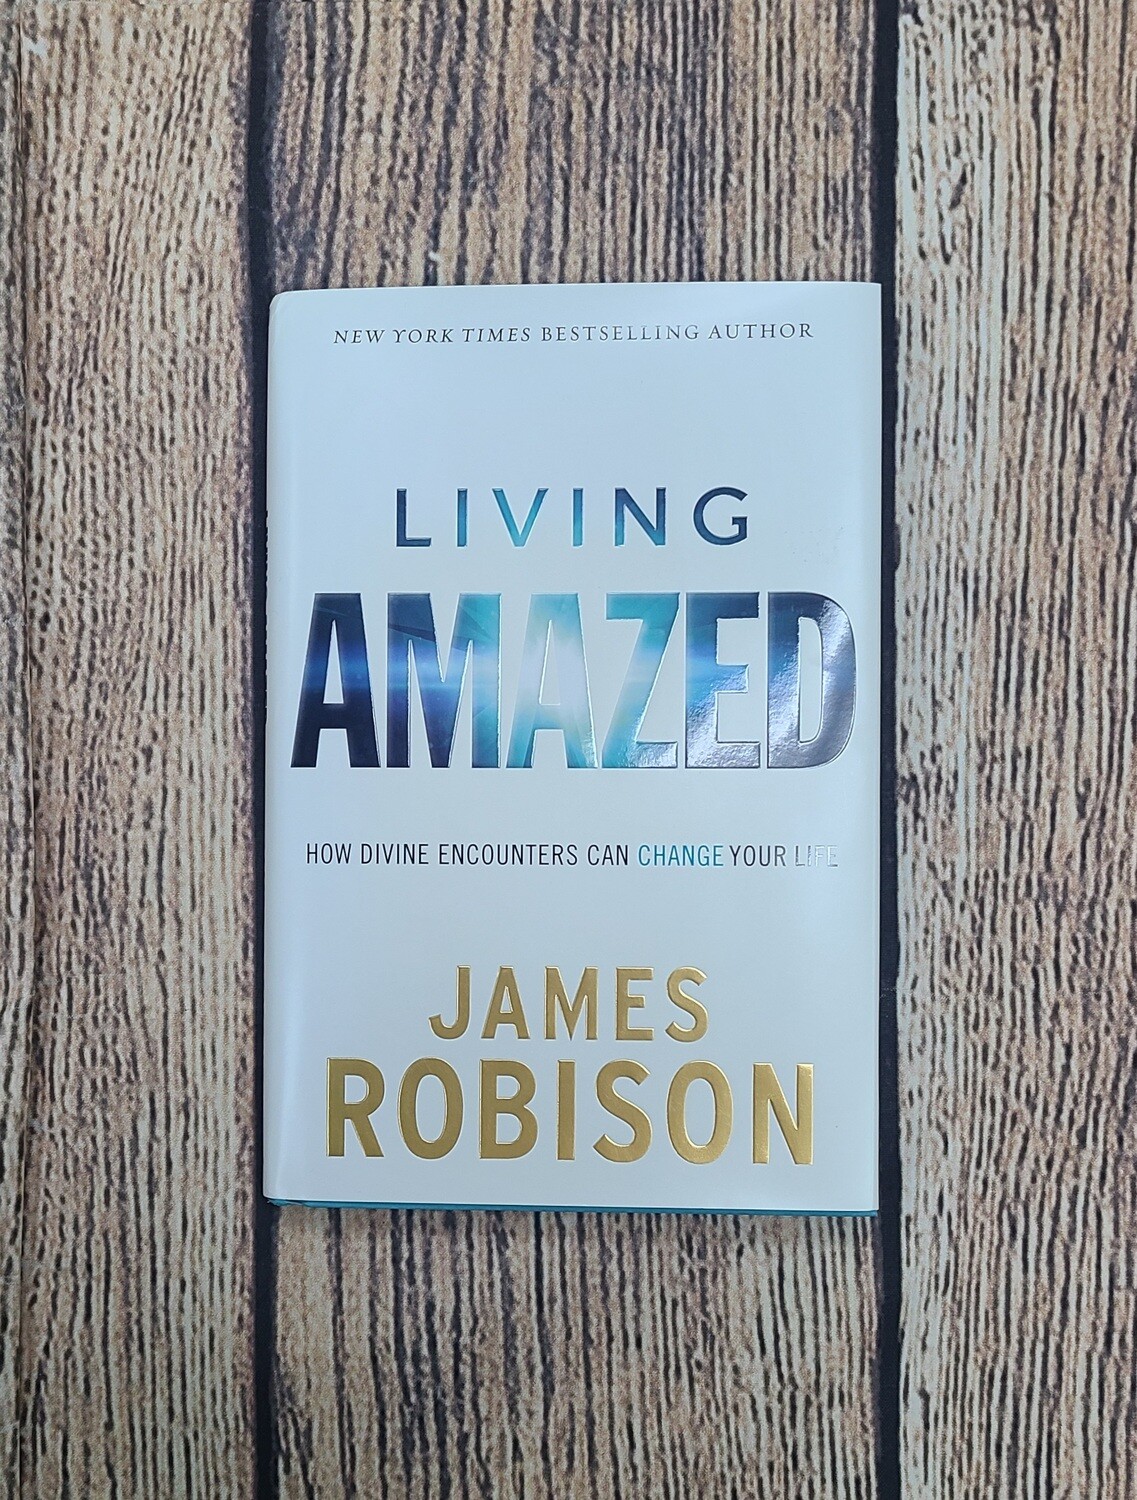 Living Amazed by James Robison